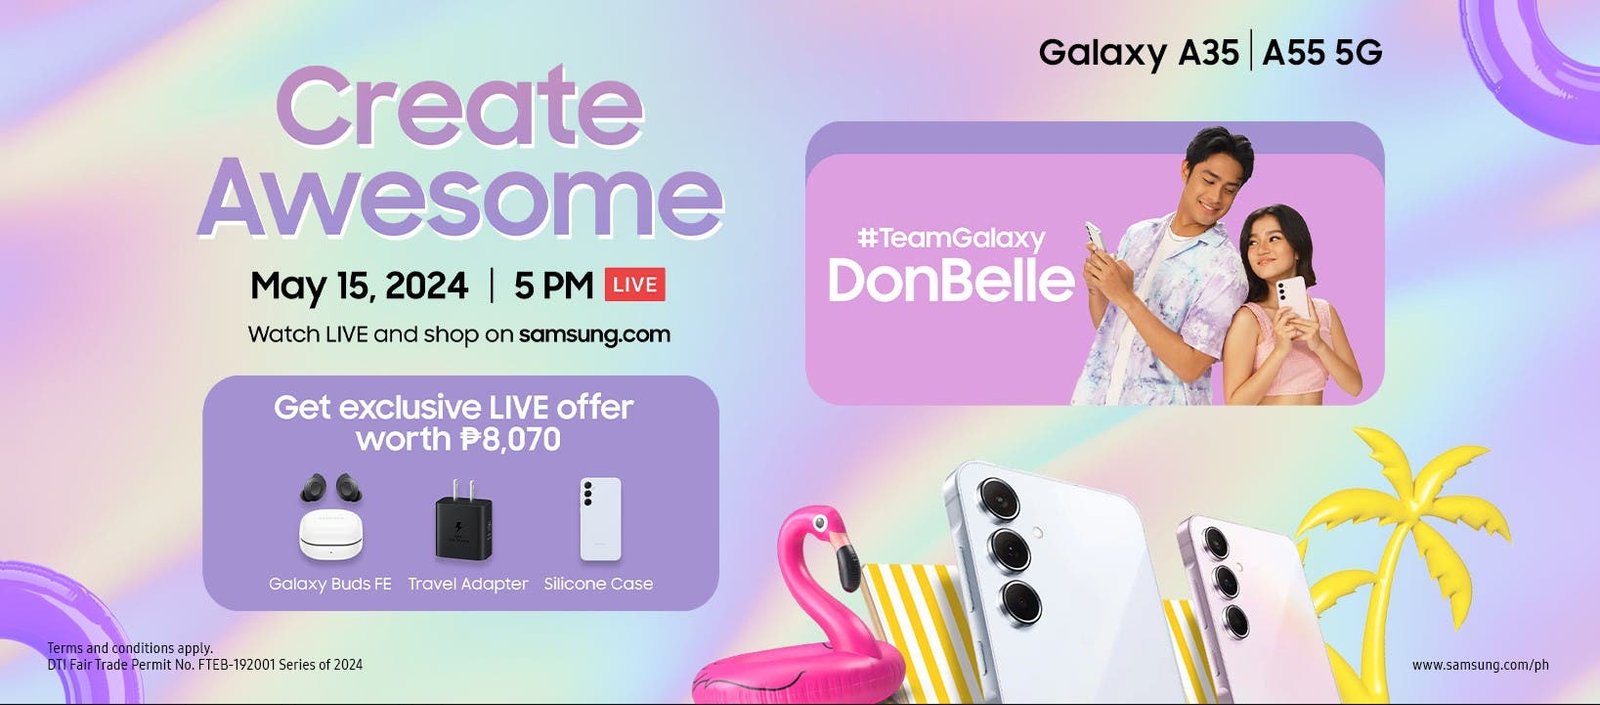 Create Awesome with Donny Pangilinan and Belle Mariano